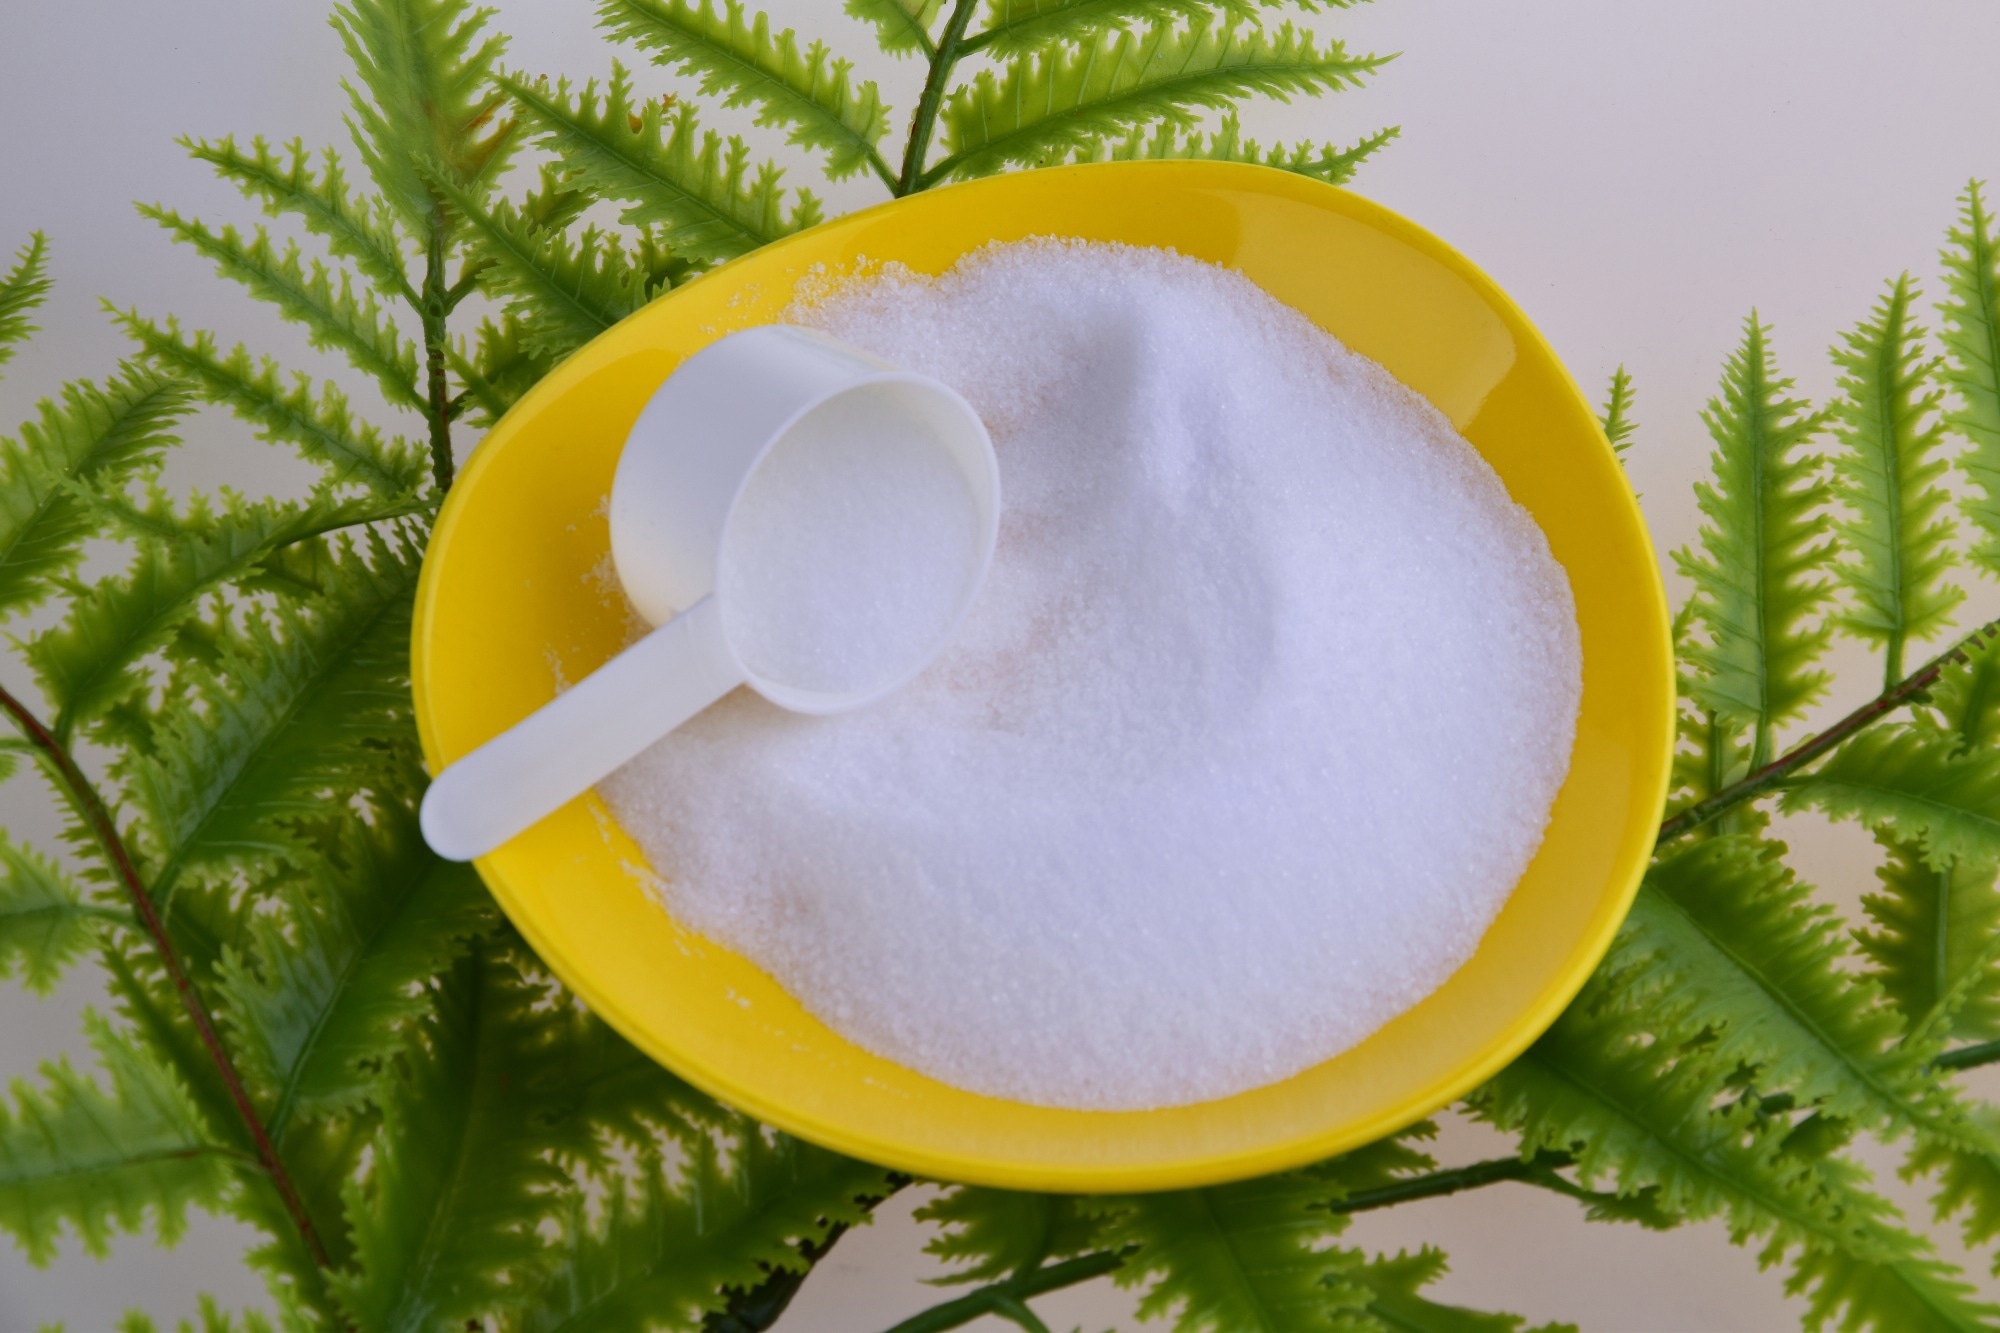 Review: Effect of Non-Nutritive Sweeteners on the Gut Microbiota. Image Credit: cruspan / Shutterstock